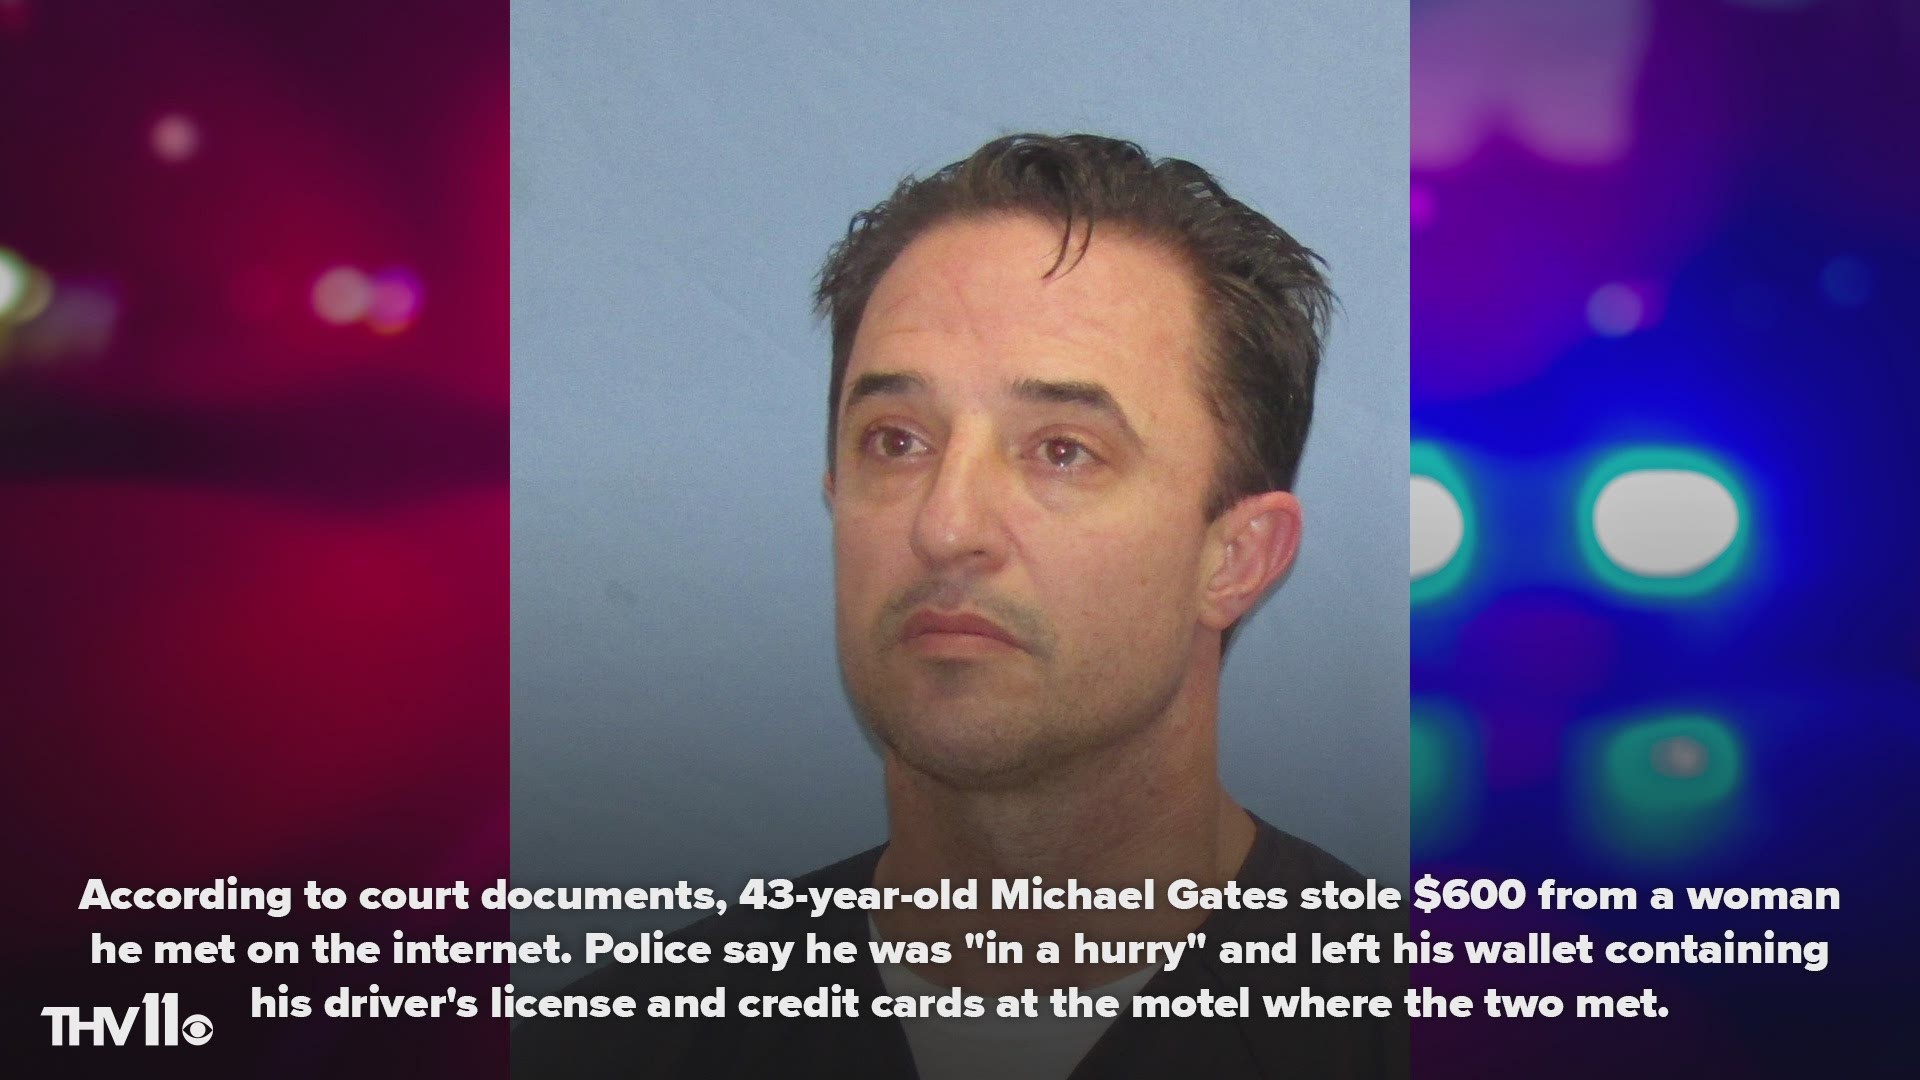 43-year-old Michael Gates was arrested after deputies found methamphetamine in his residence on Saturday.